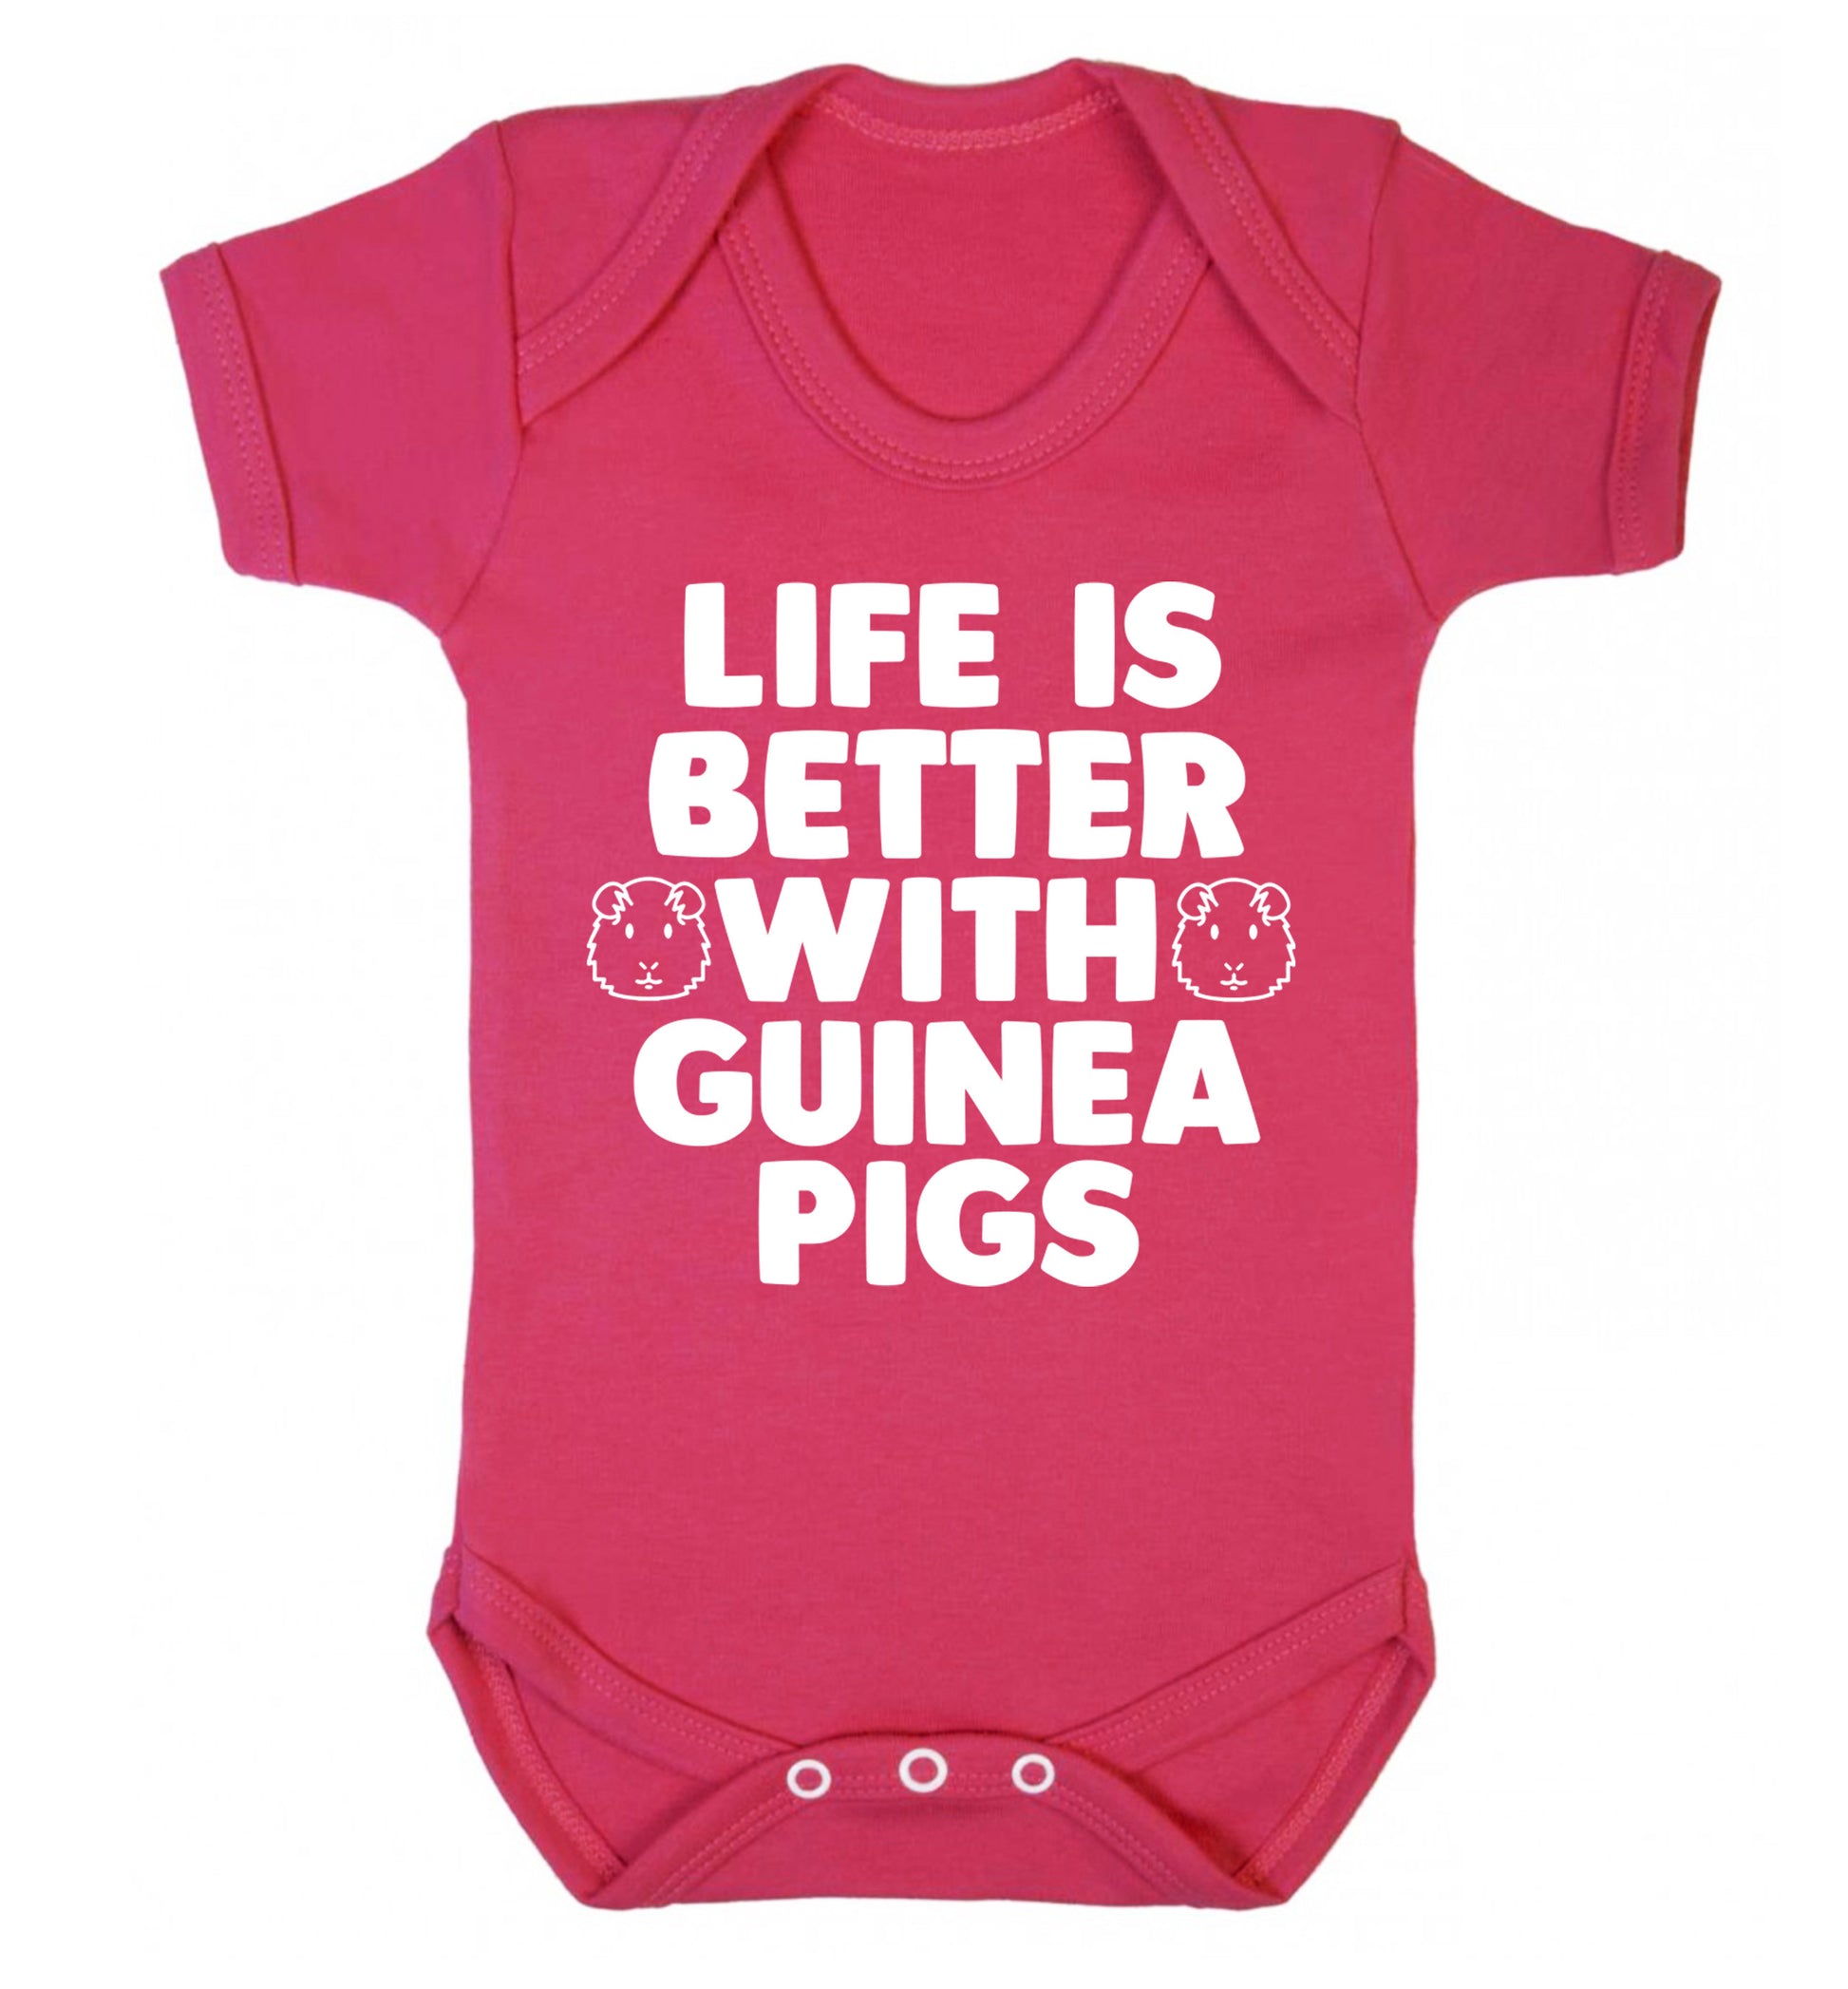 Life is better with guinea pigs Baby Vest dark pink 18-24 months